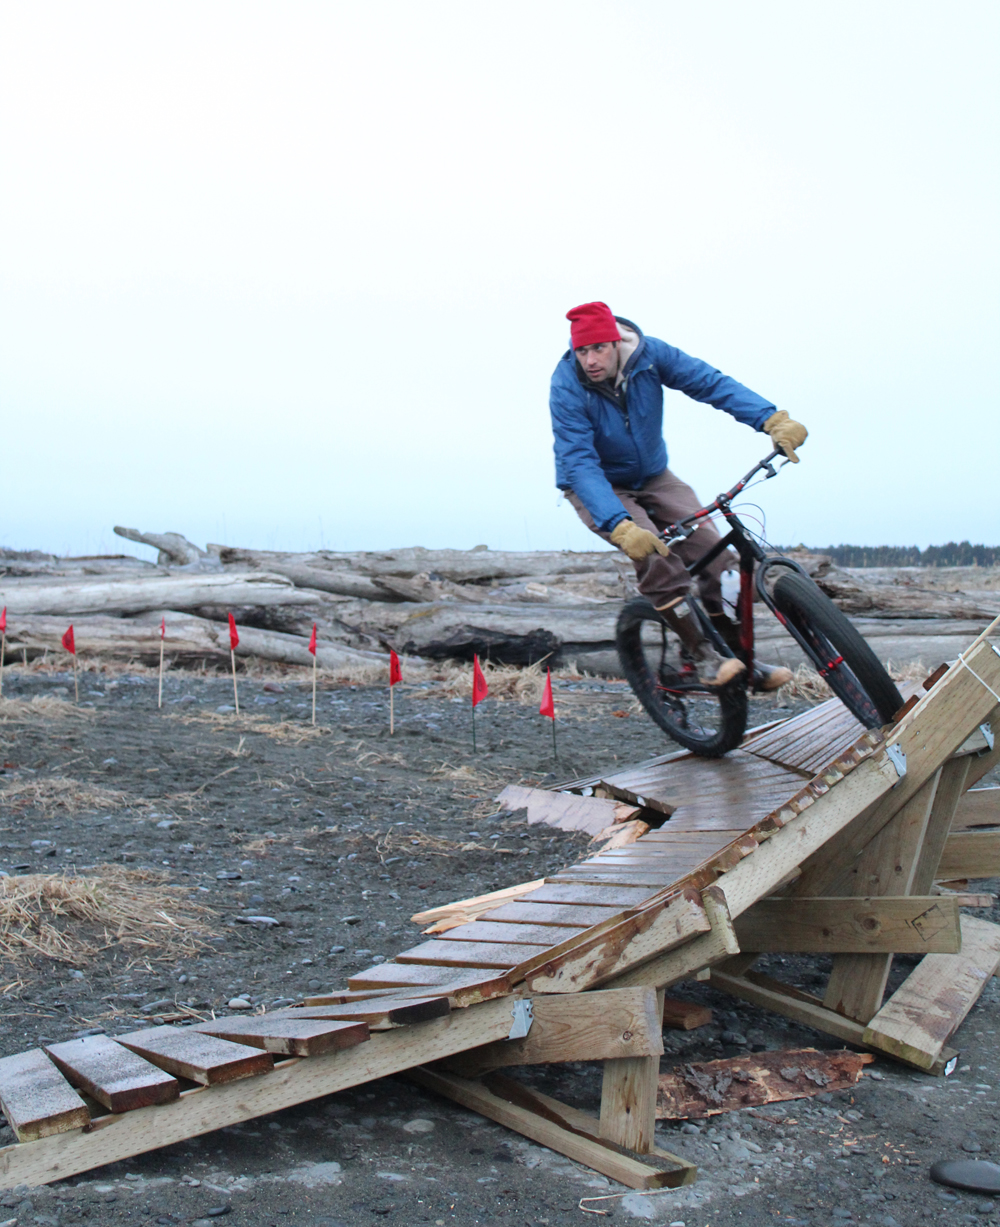 Forrest Janukajtis rounds a slanted ramp on the Big Fat Bike Festival obstacle course at the Friday, March 11 bonfire. Janukajtis come down from Anchorage to participate in the festival with his family.-Photo by Anna Frost, Homer News